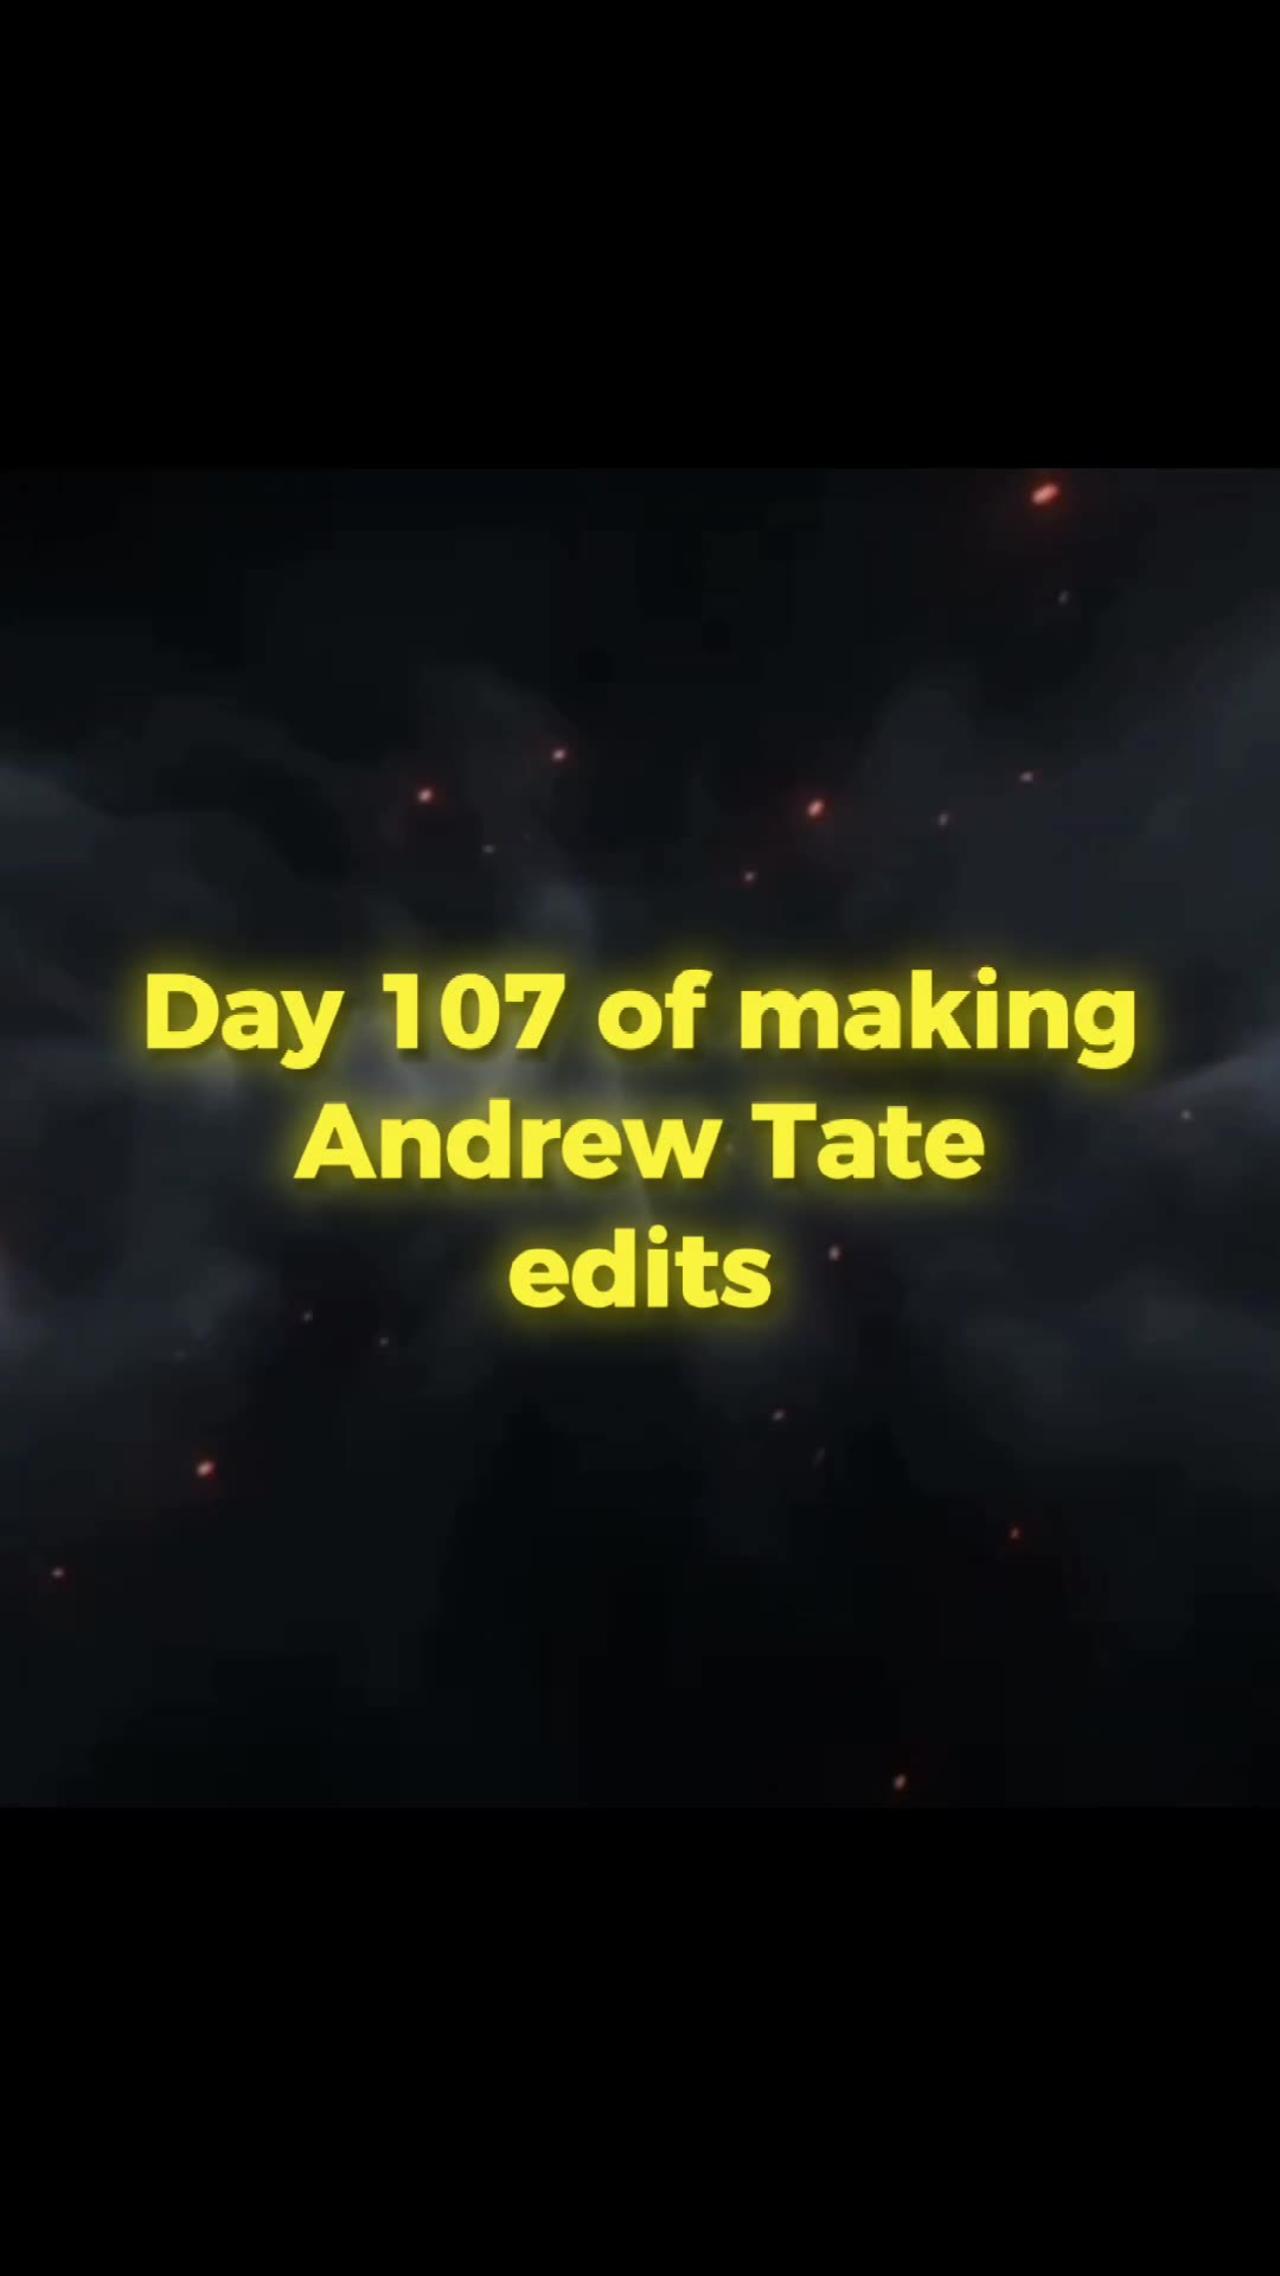 Day 107 of 75 hard challenge of making Andrew tate edits until he recognize ME.#tate #andrewtate